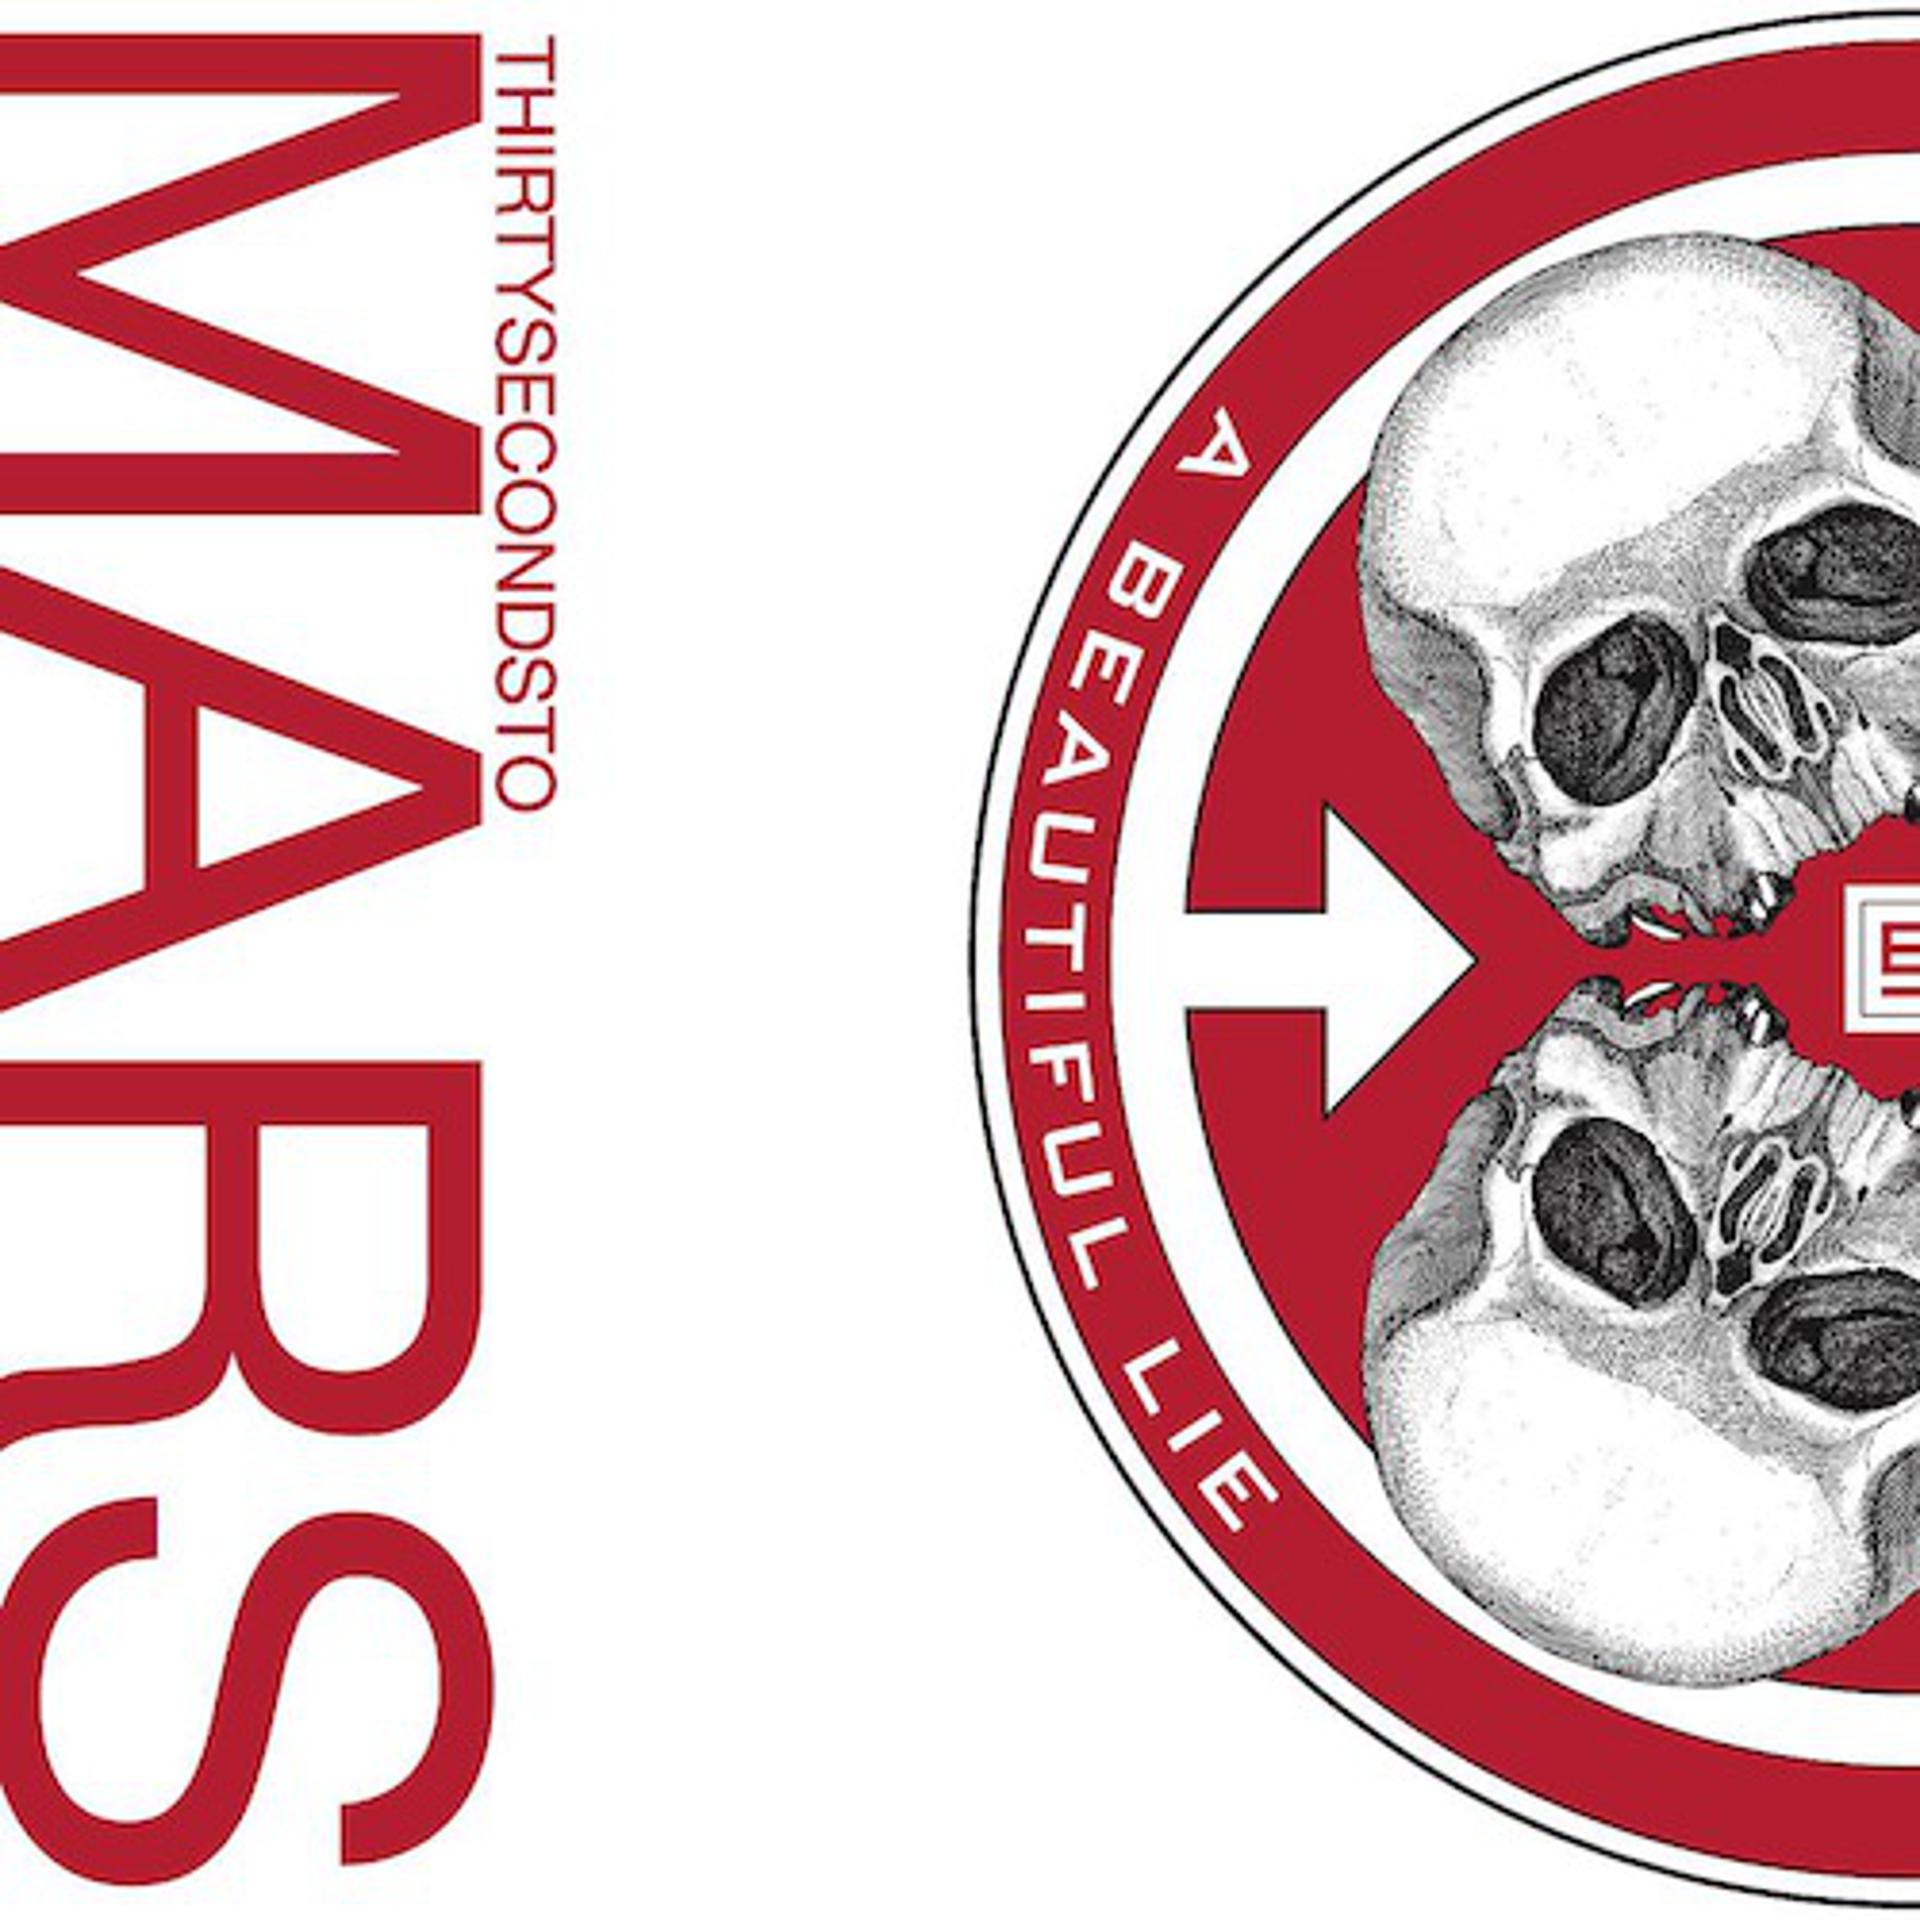 30 seconds to mars lie. 30 Seconds to Mars a beautiful Lie альбом. 30 Seconds to Mars a beautiful Lie 2005. 30 Seconds to Mars a beautiful Lie обложка. 30 Seconds to Mars обложки альбомов.